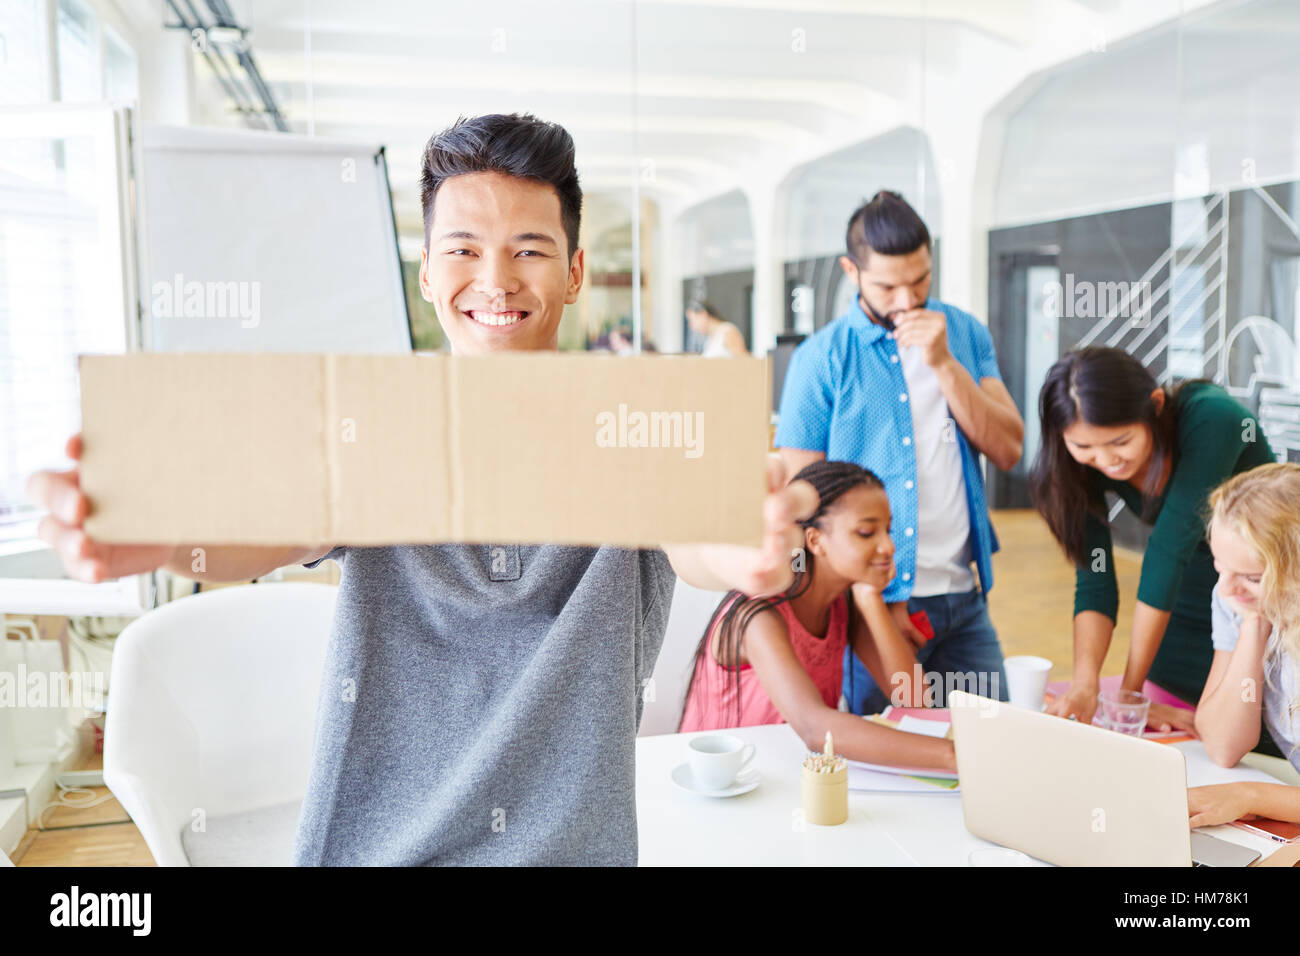 Creative brainstorming in workshop and man holding blank sign Stock Photo